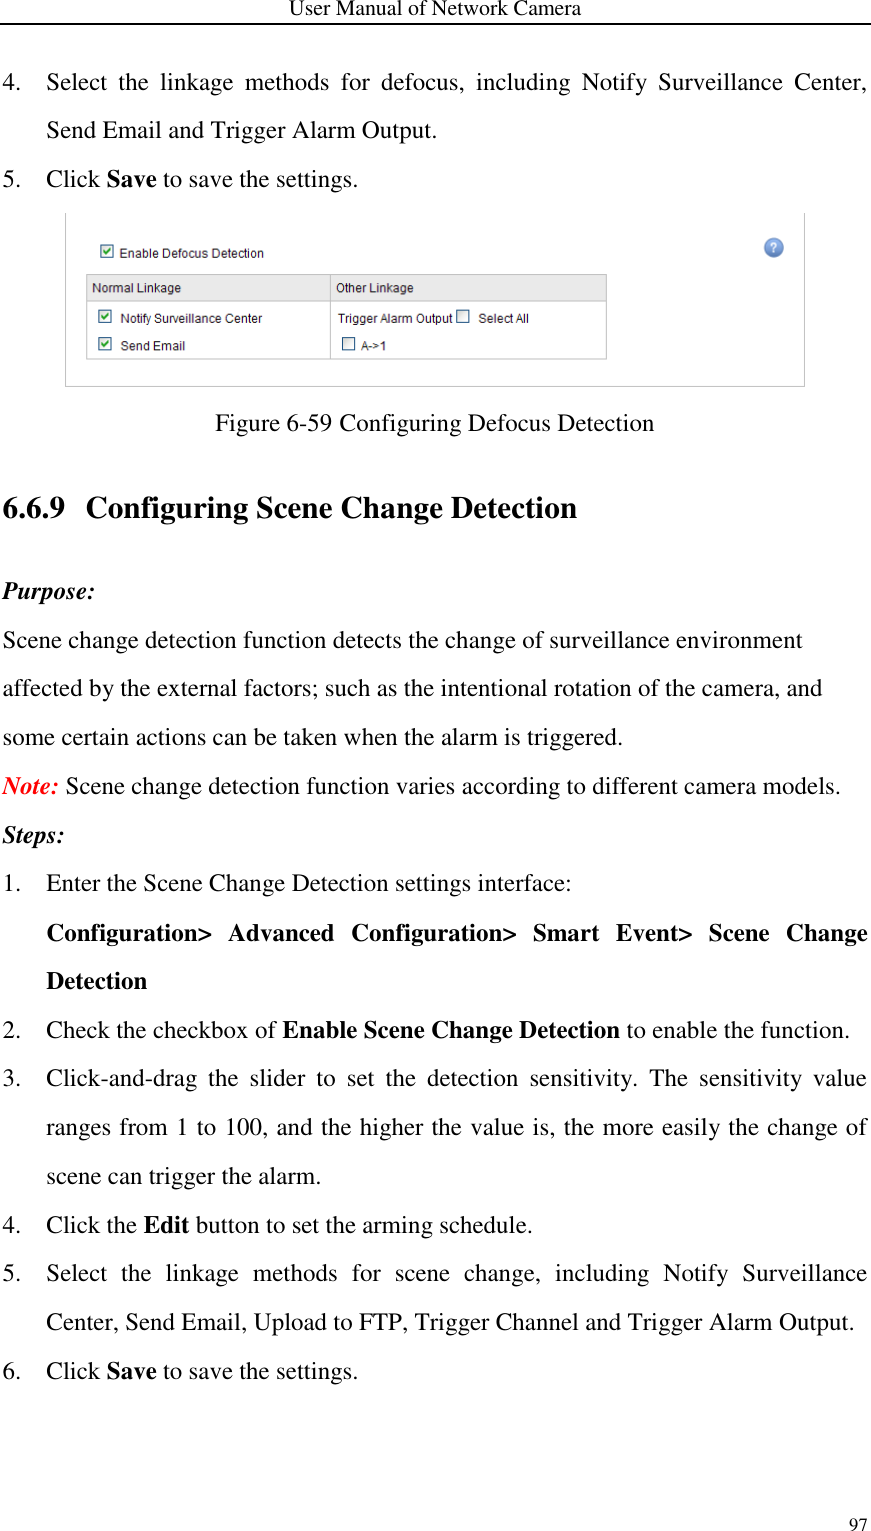 User Manual of Network Camera 97  4. Select  the  linkage  methods  for  defocus,  including  Notify  Surveillance  Center, Send Email and Trigger Alarm Output. 5. Click Save to save the settings.  Figure 6-59 Configuring Defocus Detection 6.6.9 Configuring Scene Change Detection Purpose: Scene change detection function detects the change of surveillance environment affected by the external factors; such as the intentional rotation of the camera, and some certain actions can be taken when the alarm is triggered. Note: Scene change detection function varies according to different camera models. Steps: 1. Enter the Scene Change Detection settings interface: Configuration&gt;  Advanced  Configuration&gt;  Smart  Event&gt;  Scene  Change Detection 2. Check the checkbox of Enable Scene Change Detection to enable the function. 3. Click-and-drag  the  slider  to  set  the  detection  sensitivity.  The  sensitivity  value ranges from 1 to 100, and the higher the value is, the more easily the change of scene can trigger the alarm. 4. Click the Edit button to set the arming schedule. 5. Select  the  linkage  methods  for  scene  change,  including  Notify  Surveillance Center, Send Email, Upload to FTP, Trigger Channel and Trigger Alarm Output. 6. Click Save to save the settings. 